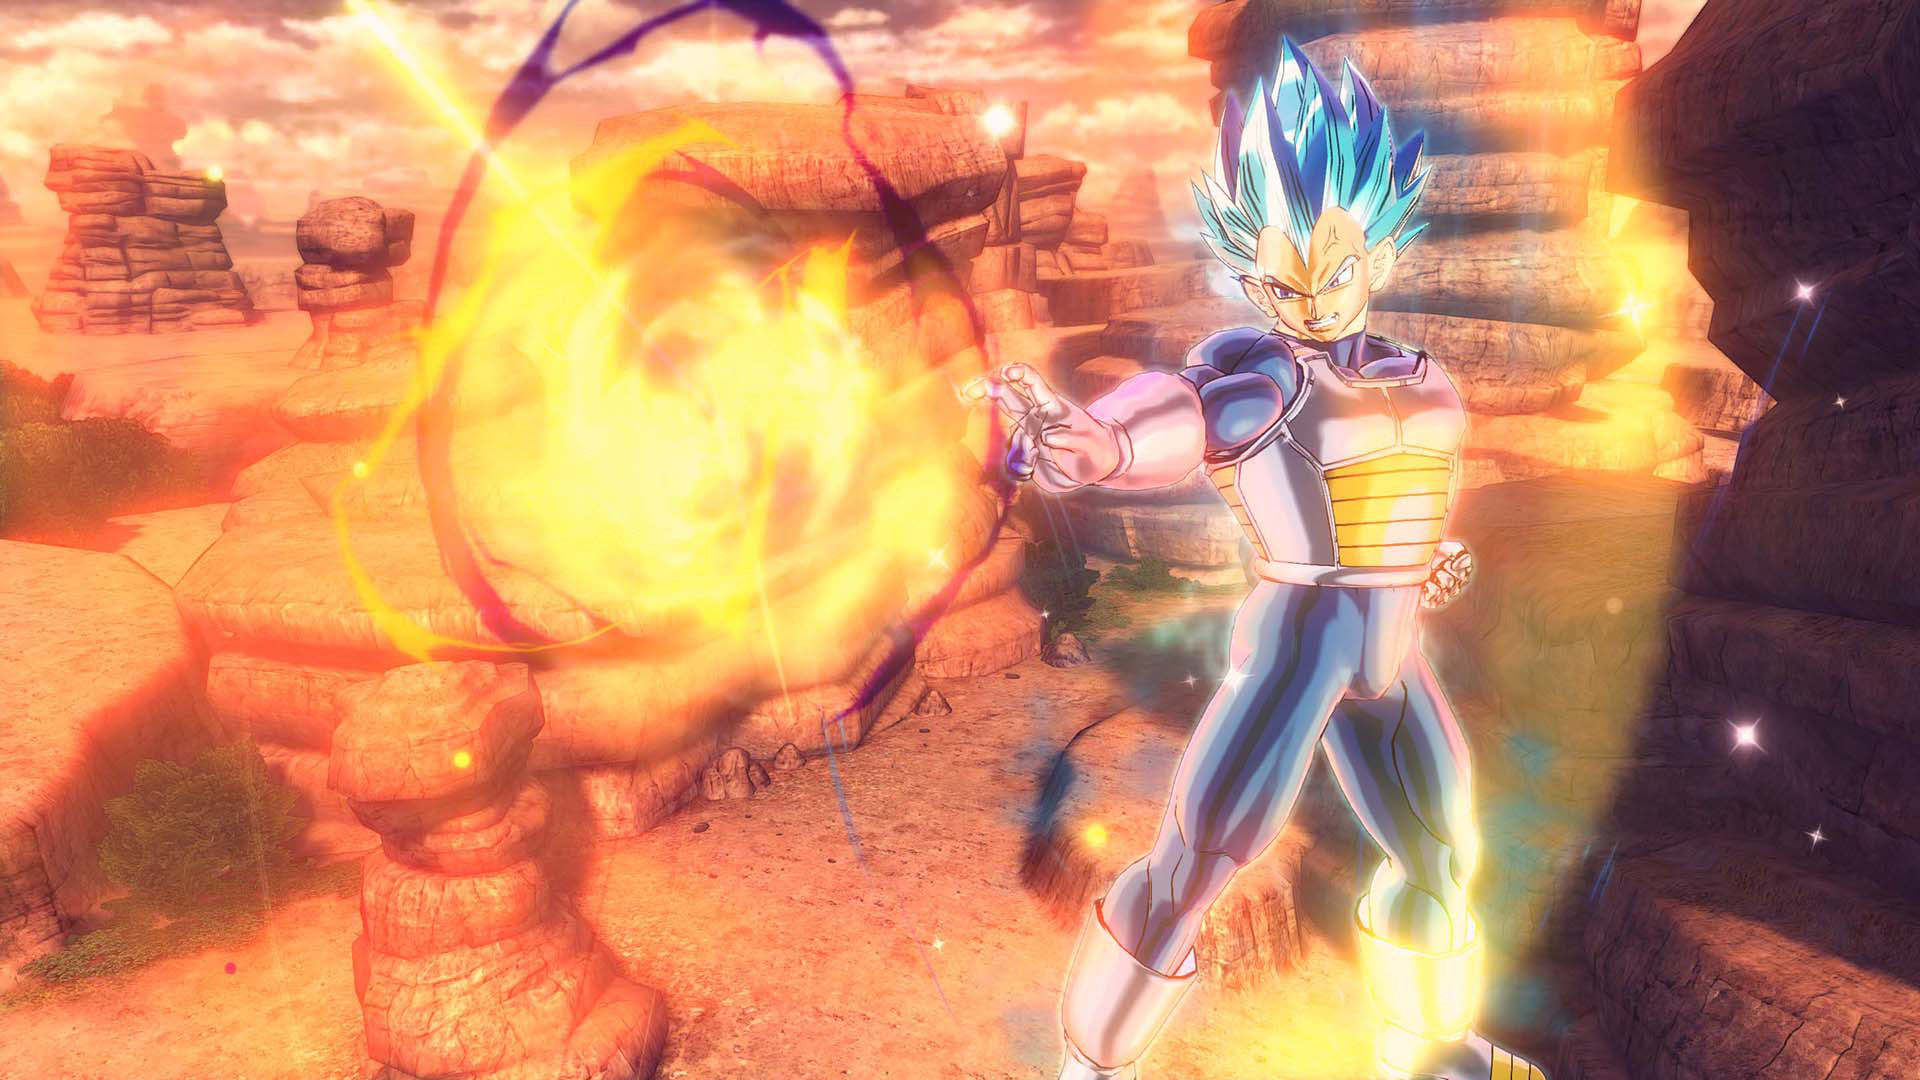 DRAGON BALL XENOVERSE 2 - Ultra Pack Set, PC Steam Downloadable Content